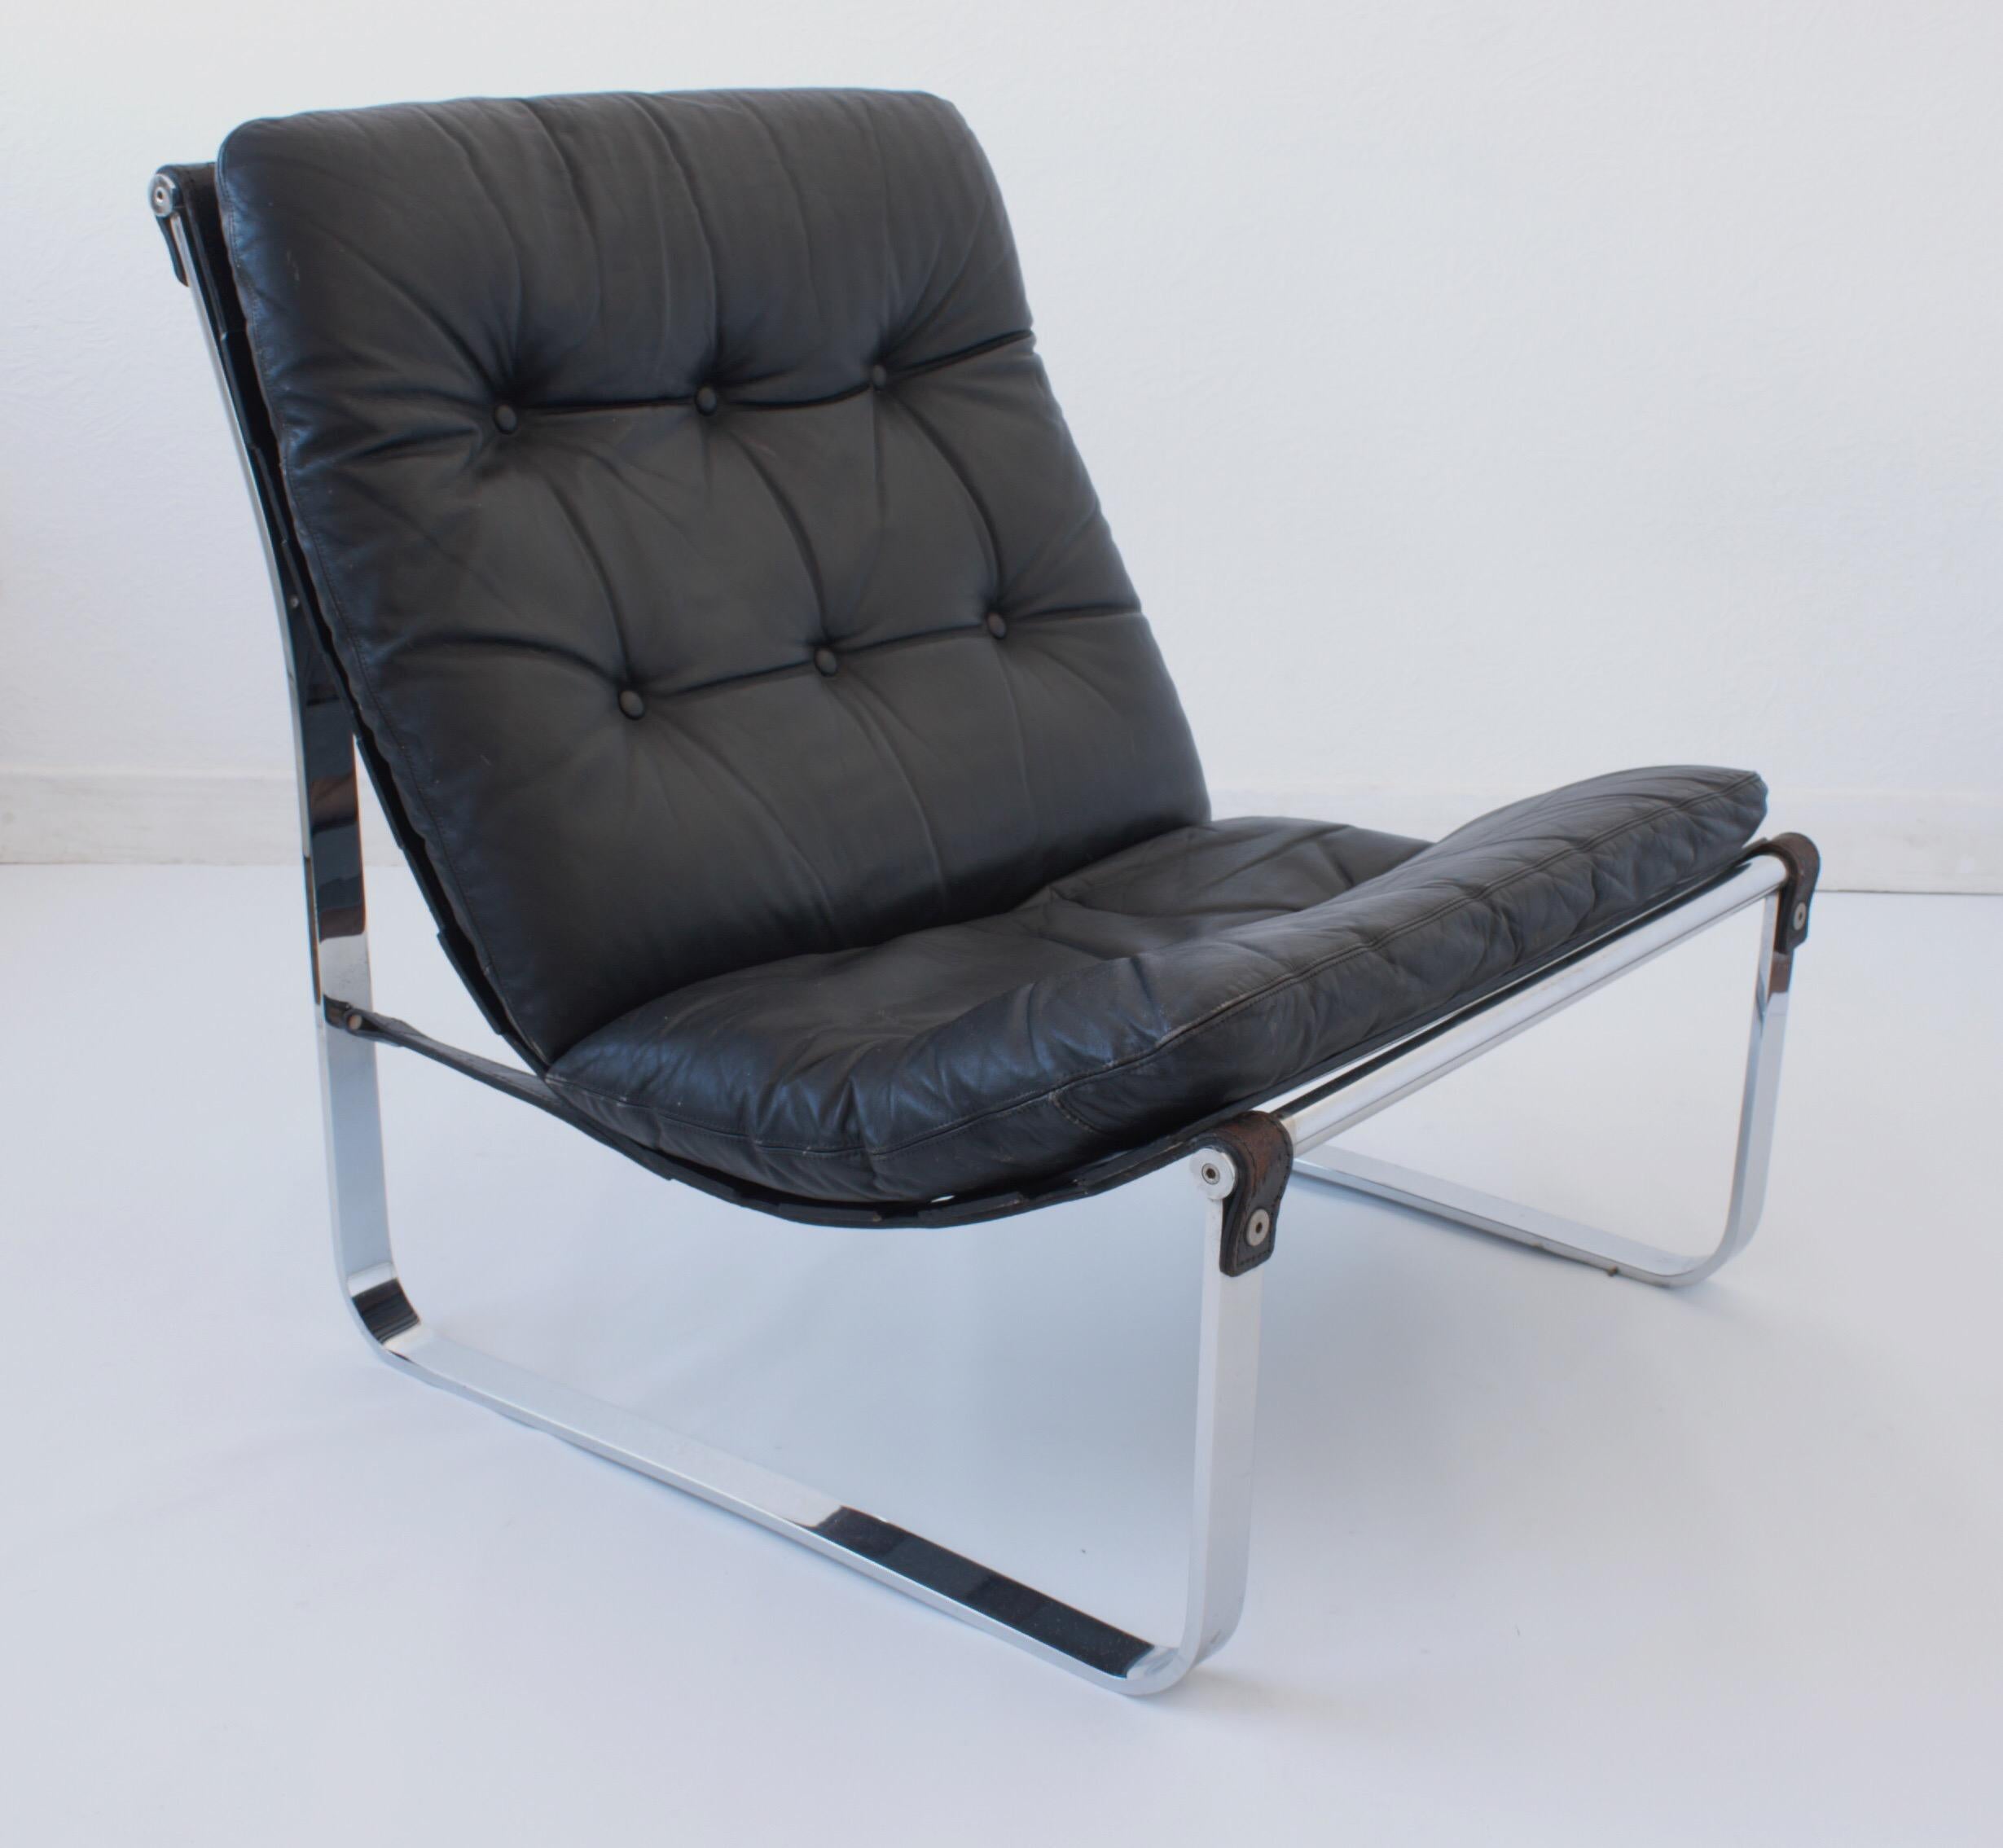 Late 20th Century Midcentury Black Leather and Chrome Chair by Relling for Westnofa, circa 1970 For Sale